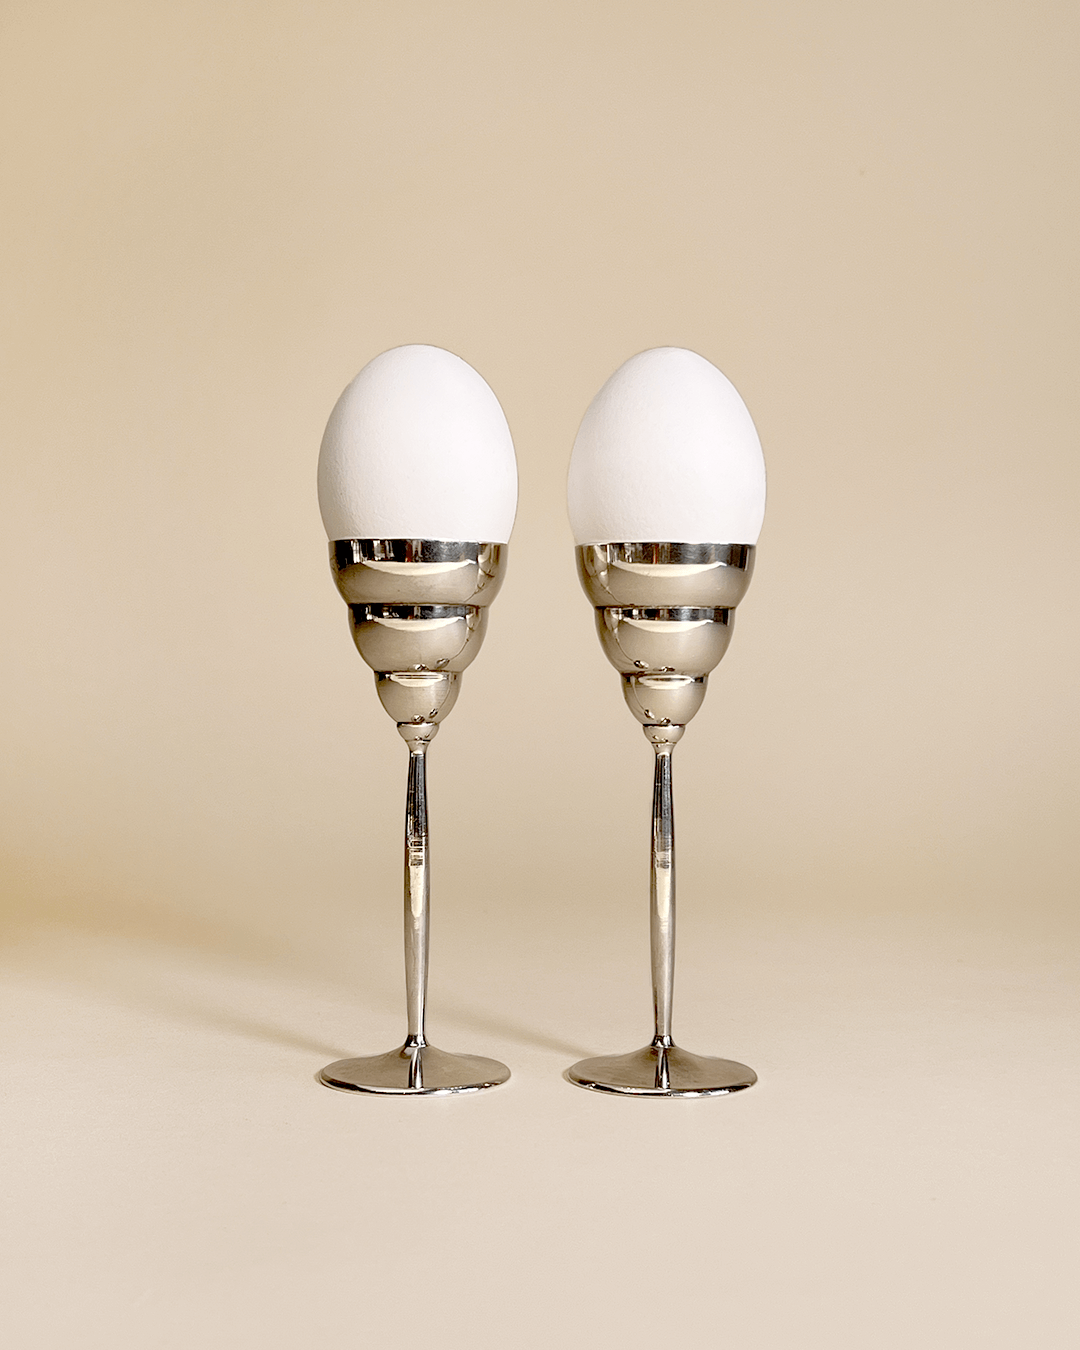 These wavy egg cups are the perfect decorative yet functional element for a cool breakfast or brunch table. The egg cups come in a set of 2.